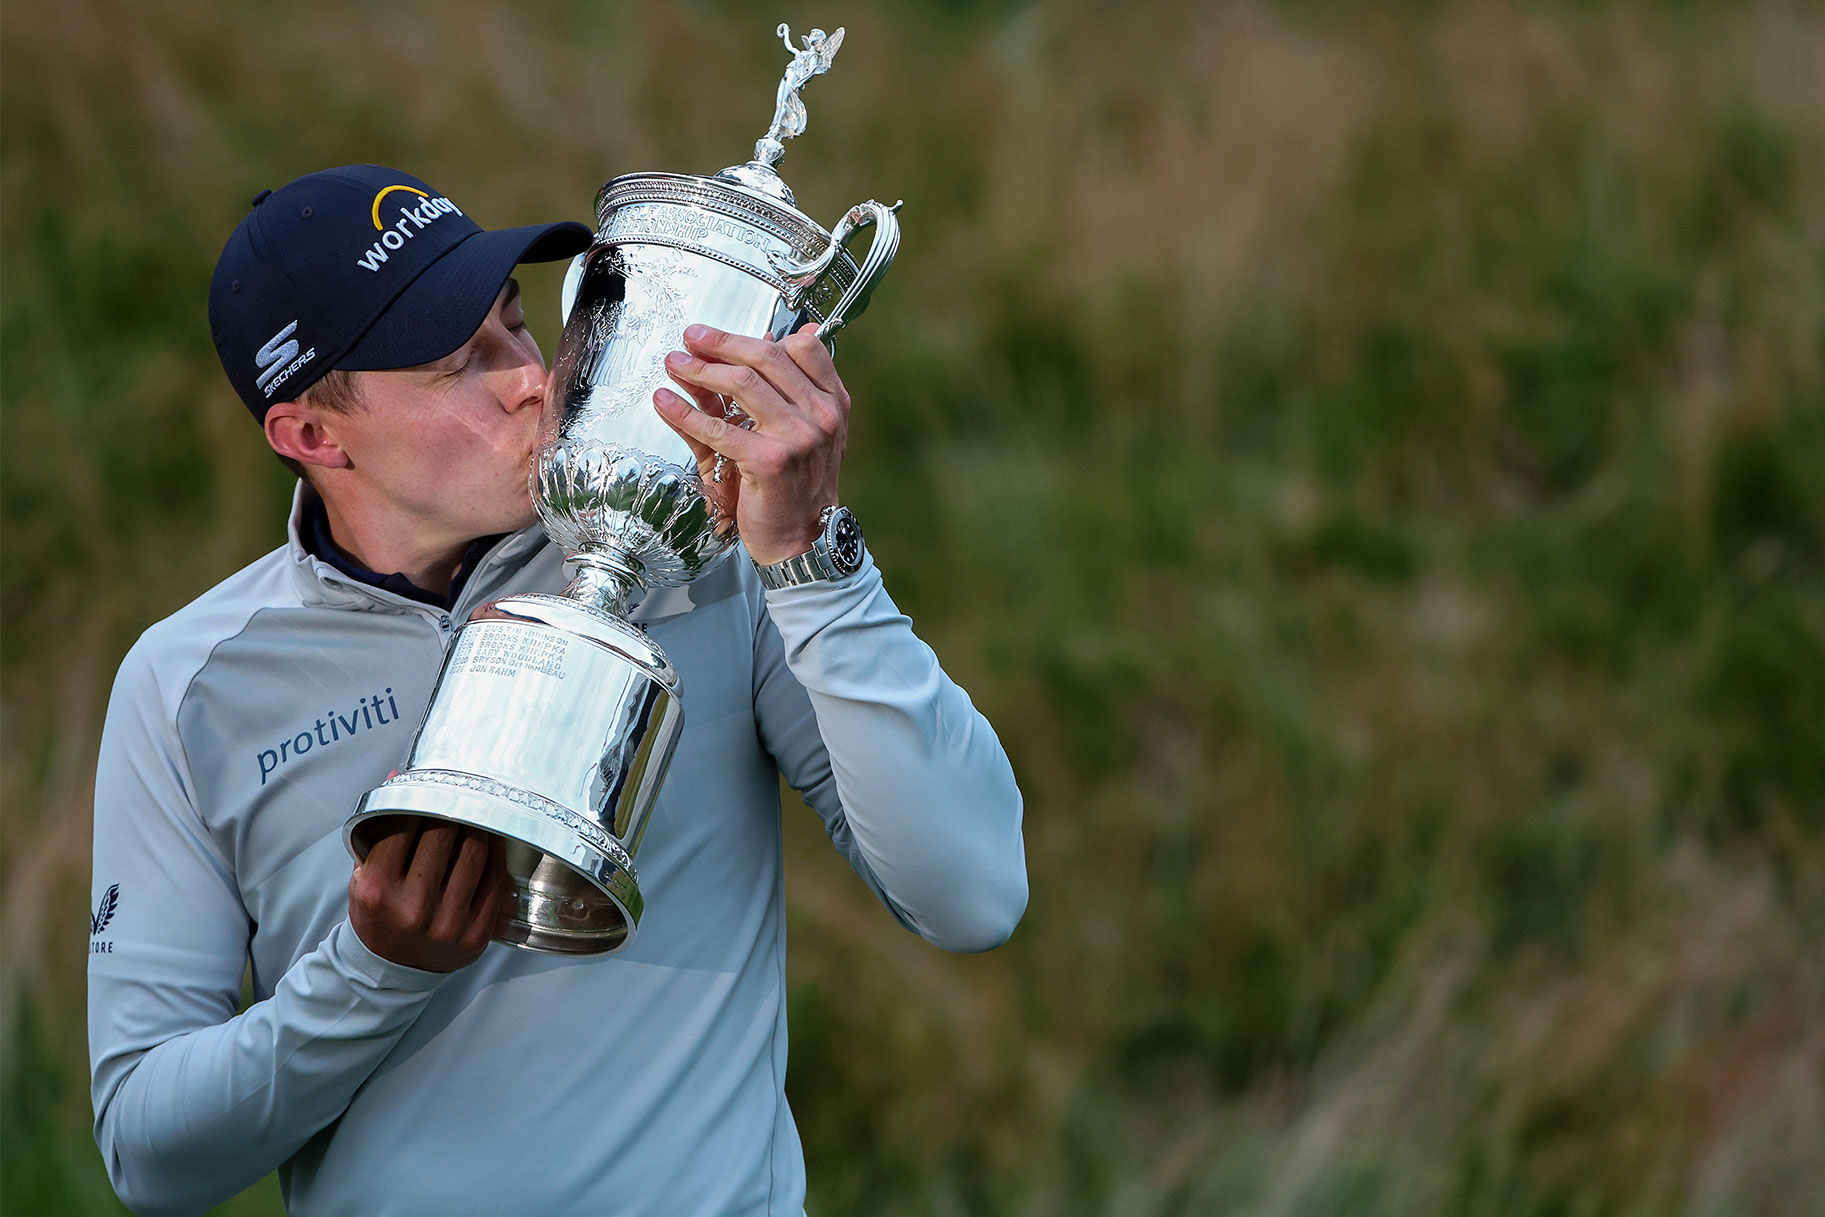 Matt Fitzpatrick of England kisses the U.S. Open Championship trophy after winning during the final round of the 122nd U.S. Open Championship